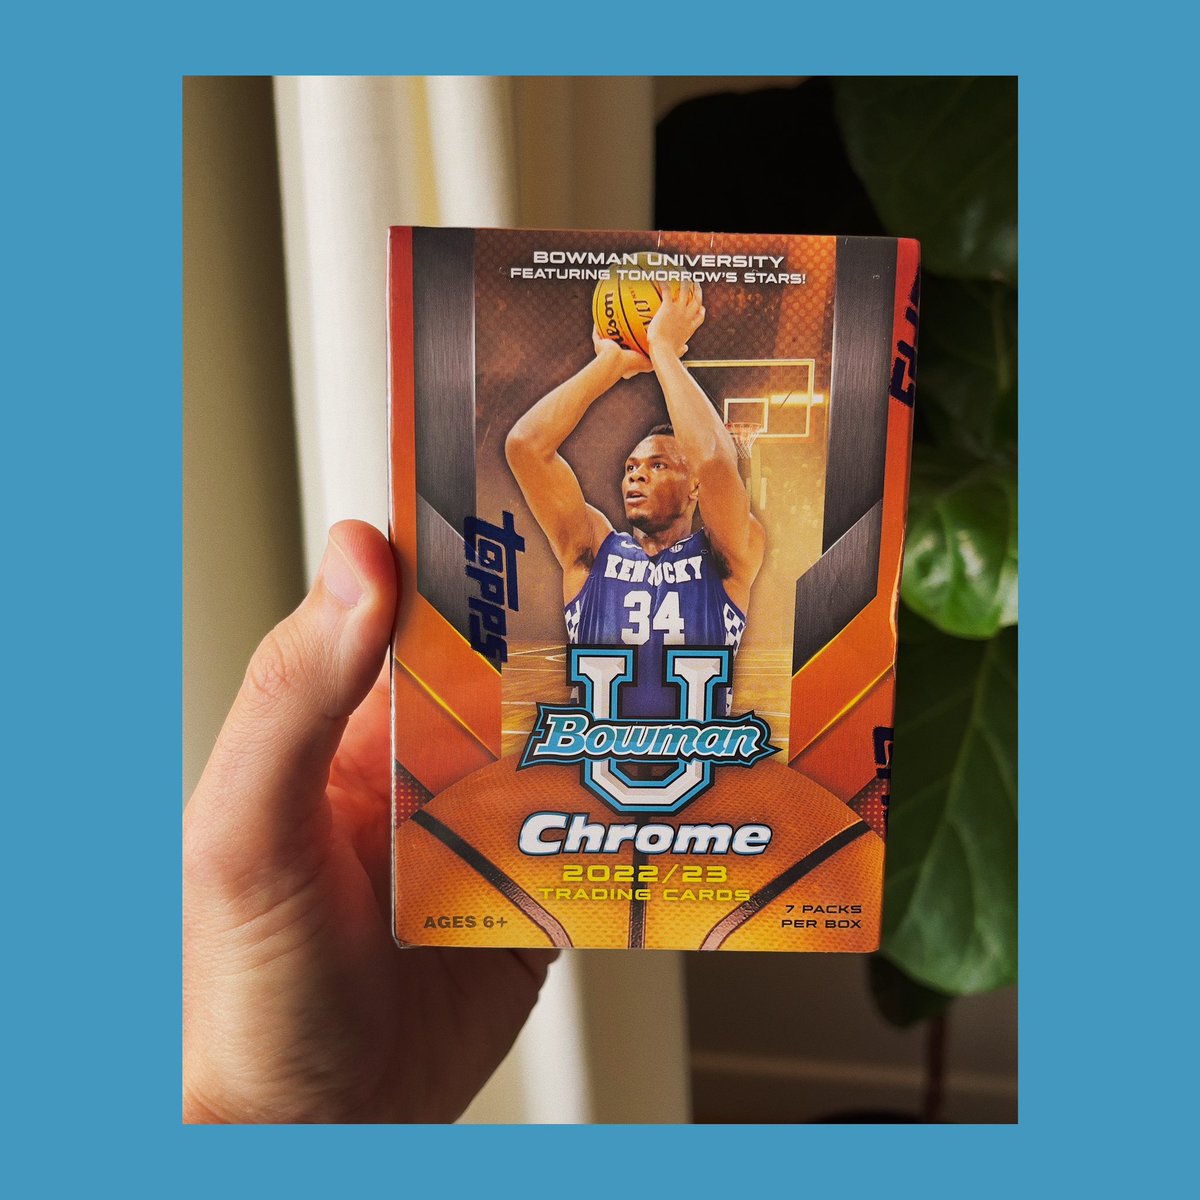 FATHER’S DAY GIVEAWAY 🚨 Bowman U Blaster 🏀

This is my first ever givvy so let’s do it big #thehobby fam! Why not hit a free CClark or Wemby?!

TO ENTER
1️⃣ Like & Retweet this post!
2️⃣ Follow me so I can DM you if you win!

Winner will be drawn on Sunday 6/18 at 5PM EST